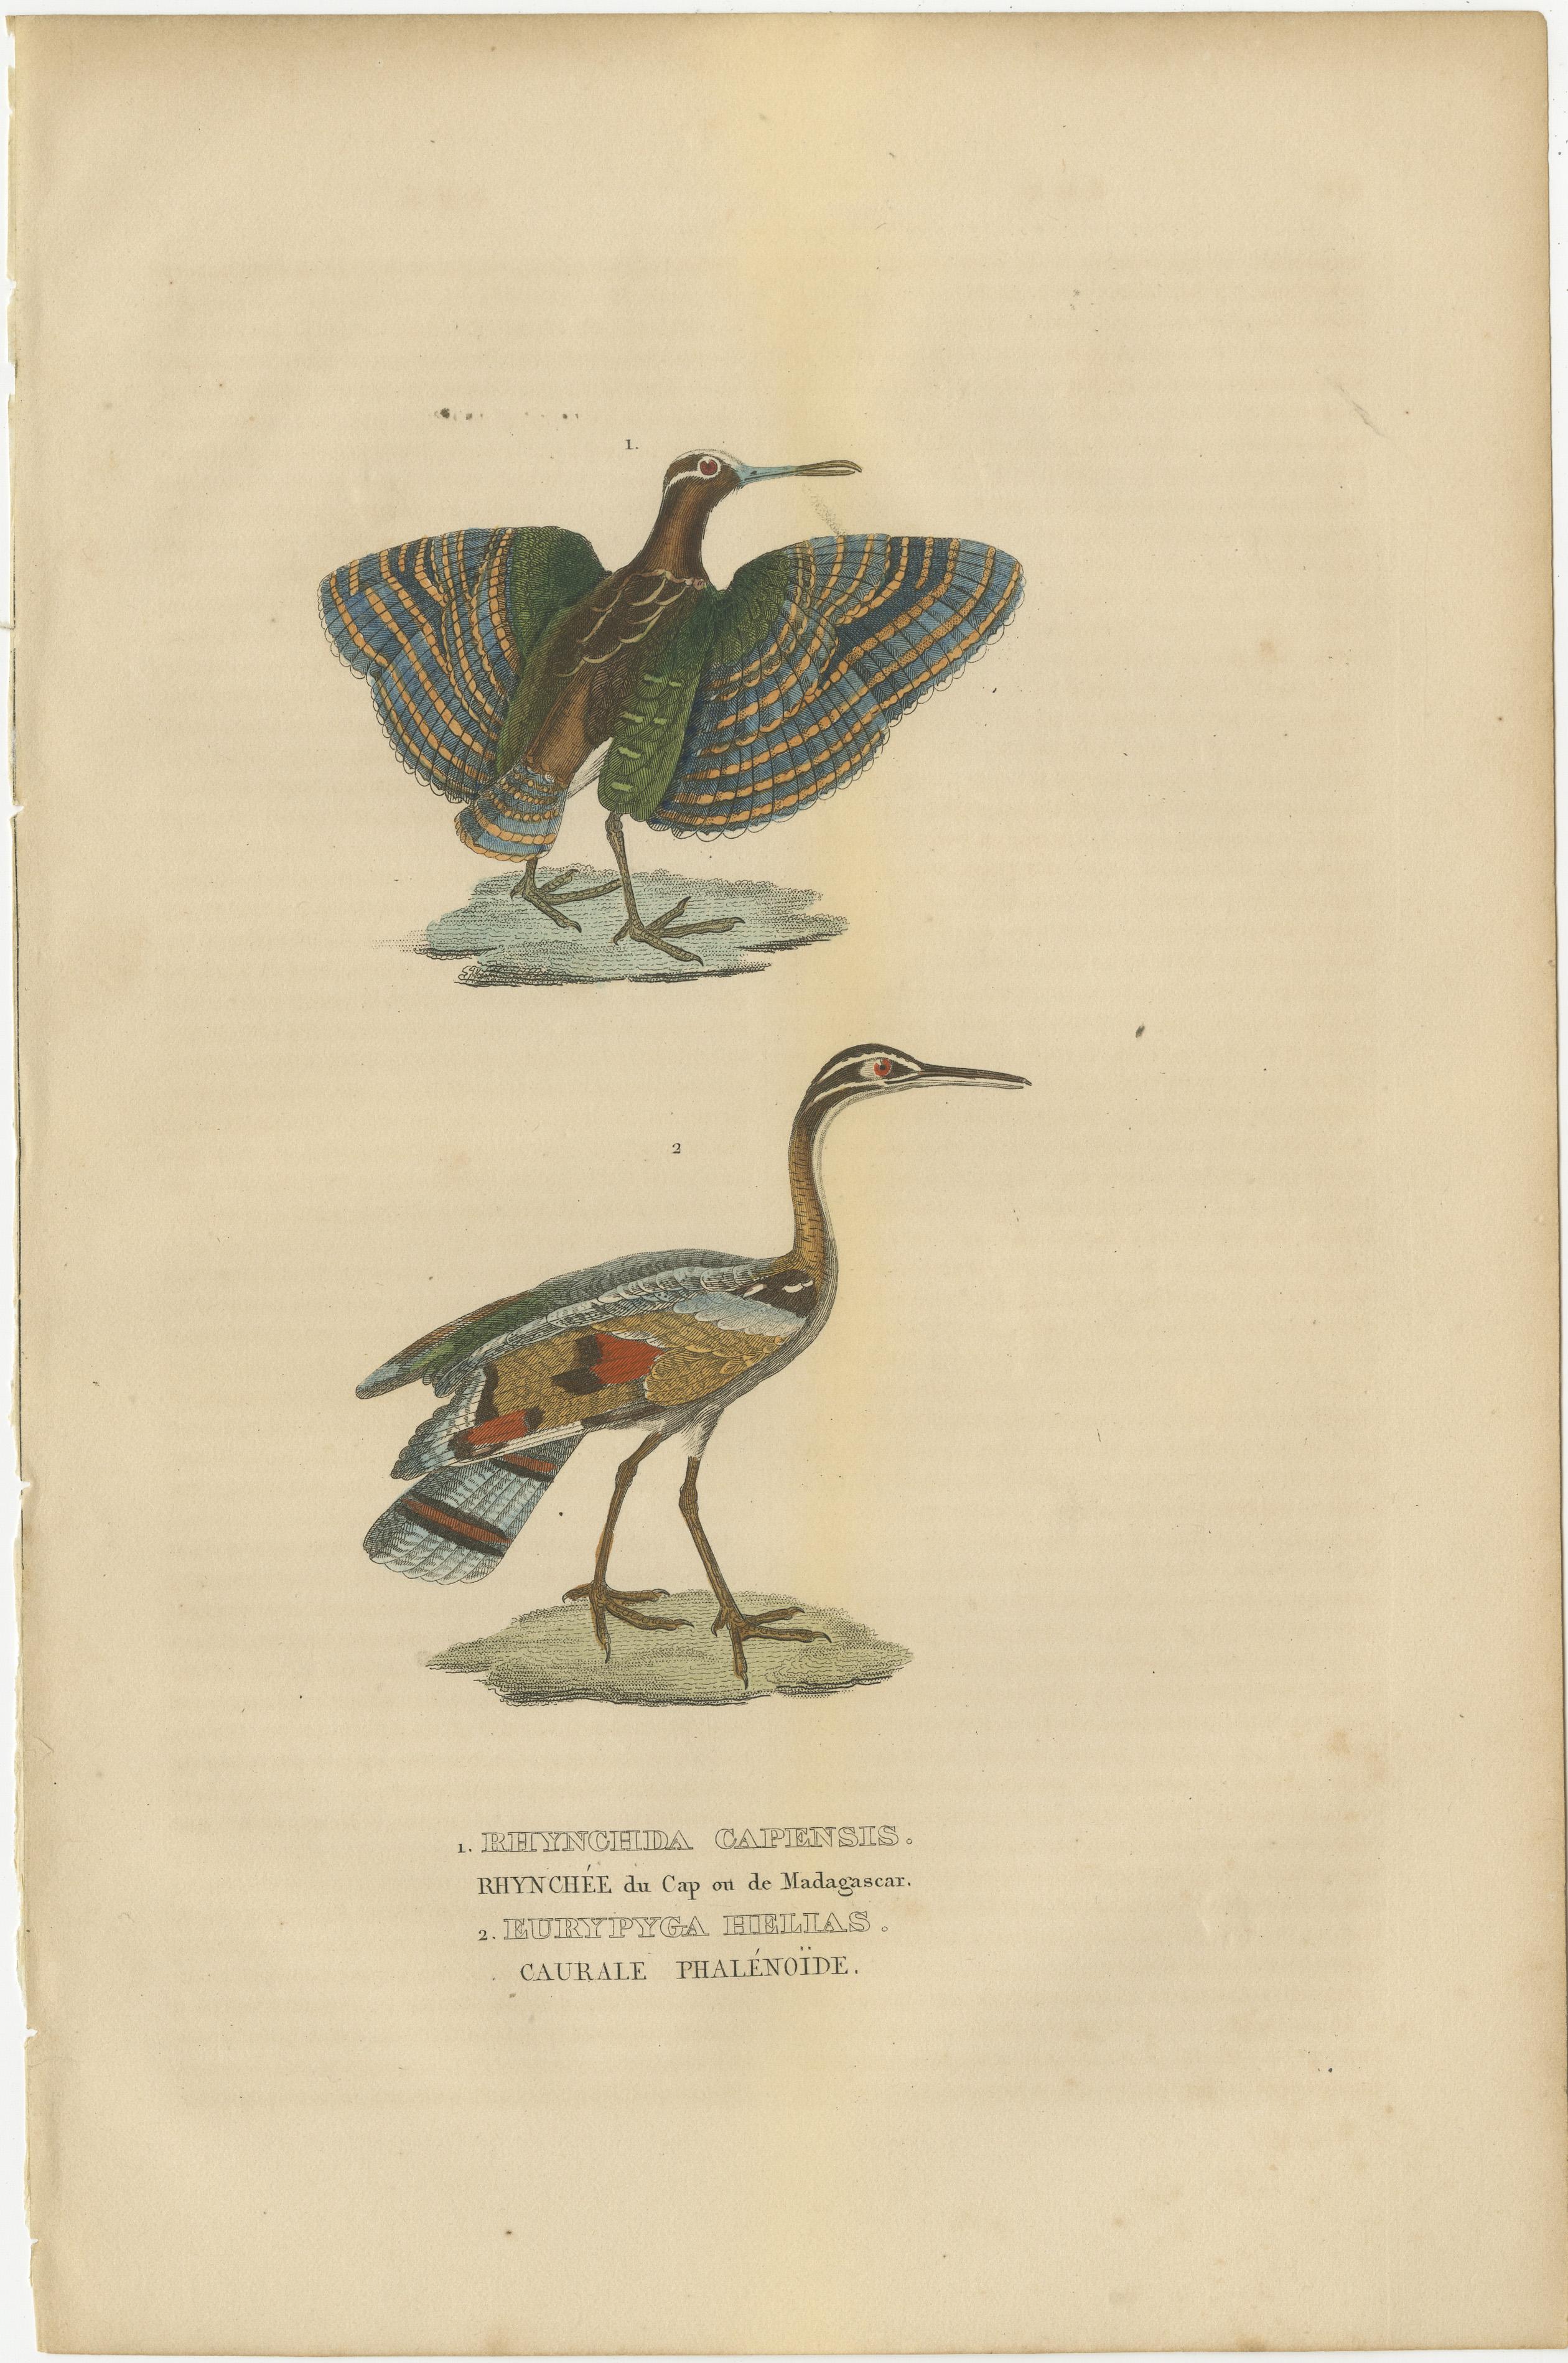 1. RHYNCHDA CAPENSIS – RHYNCHEE DU CAP OU DE MADAGASCAR, 2. EURYPYGA HELIAS – CAURALE PHALENOIDE.

 (translated; 1. Painted snipe, 2. Sunbittern, a bittern-like bird of tropical regions of the Americas.)

The painted snipe, a master of camouflage,